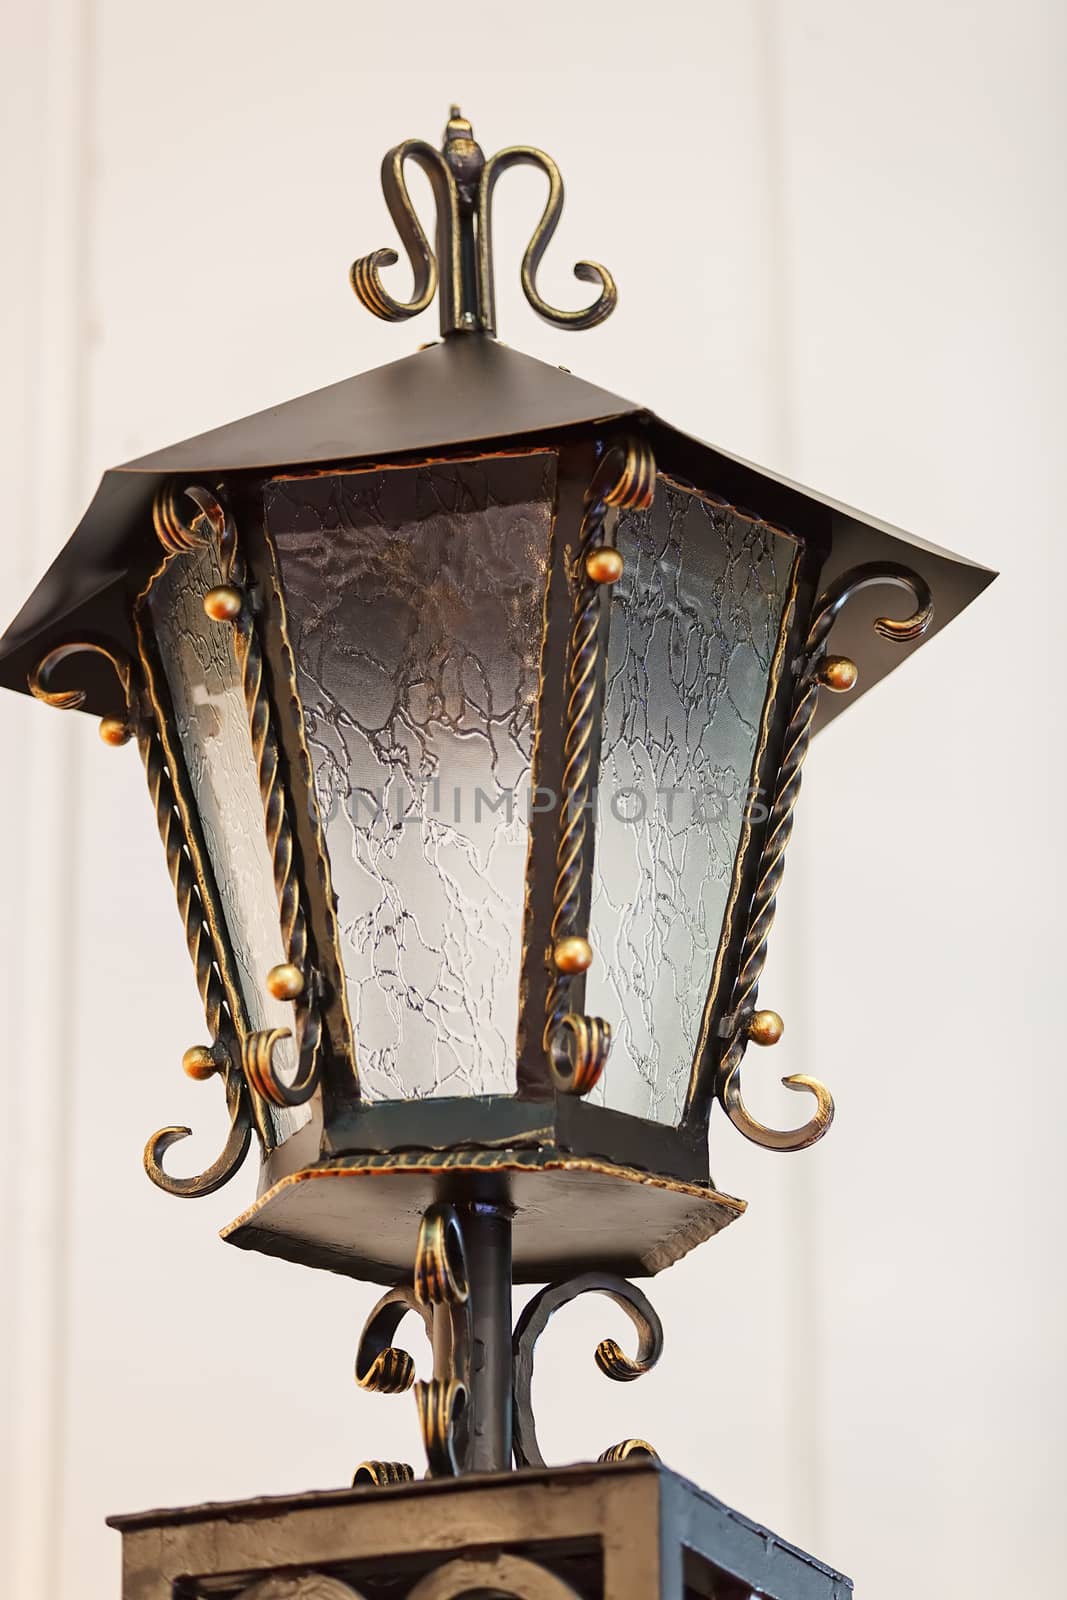 Decorative antique lantern made of wrought iron, note shallow depth of field